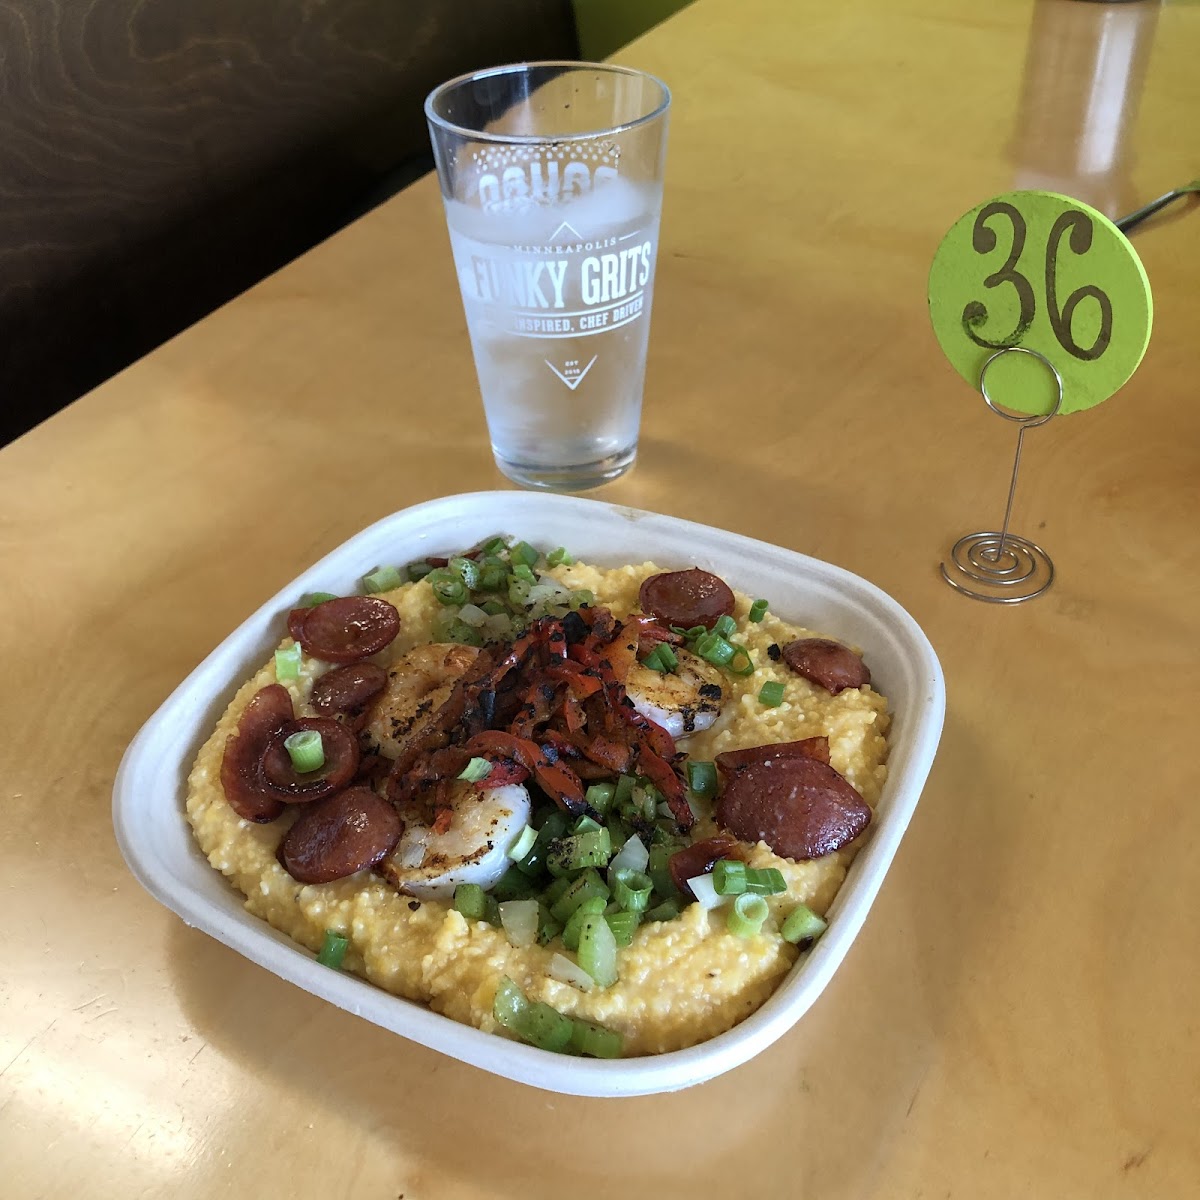 Gluten-Free at Funky Grits